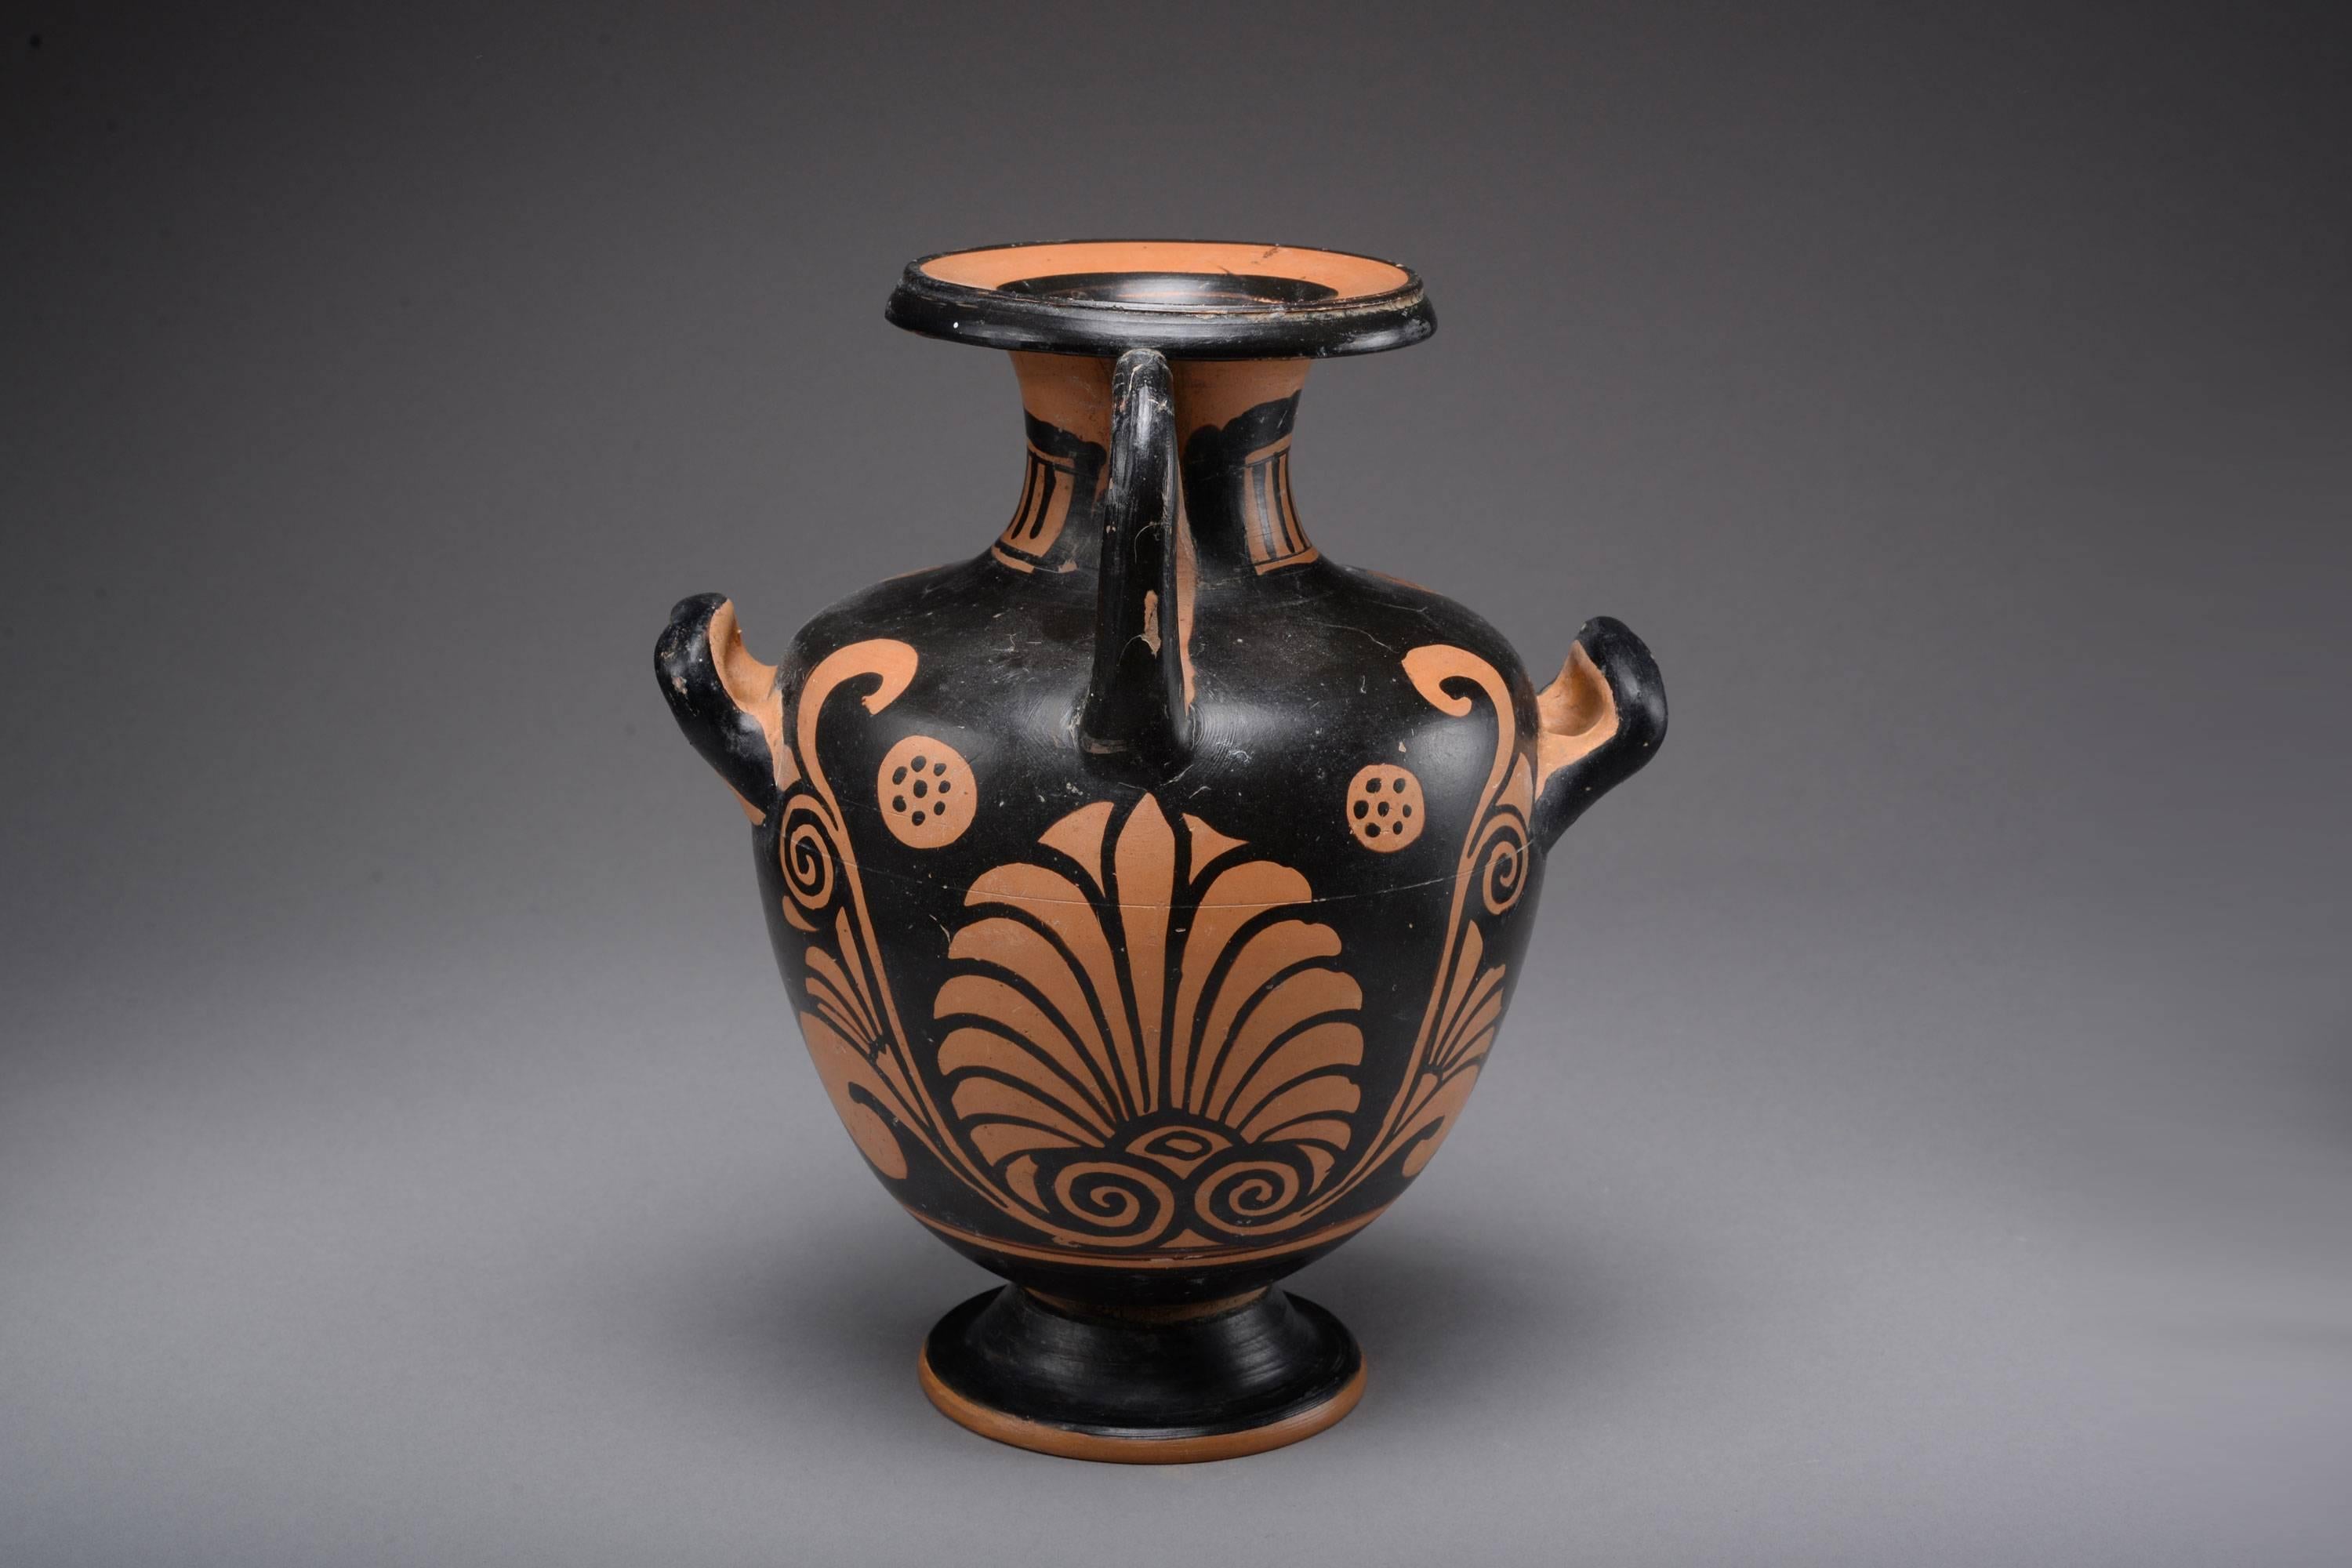 A beautiful, rare and well provenanced ancient Greek, Paestan Red-Figure Hydria (water carrying vessel), dating to the mid-4th century BC and attributed to the painter of the Louvre K 236.

The hydria is decorated with a beautiful seated lady of